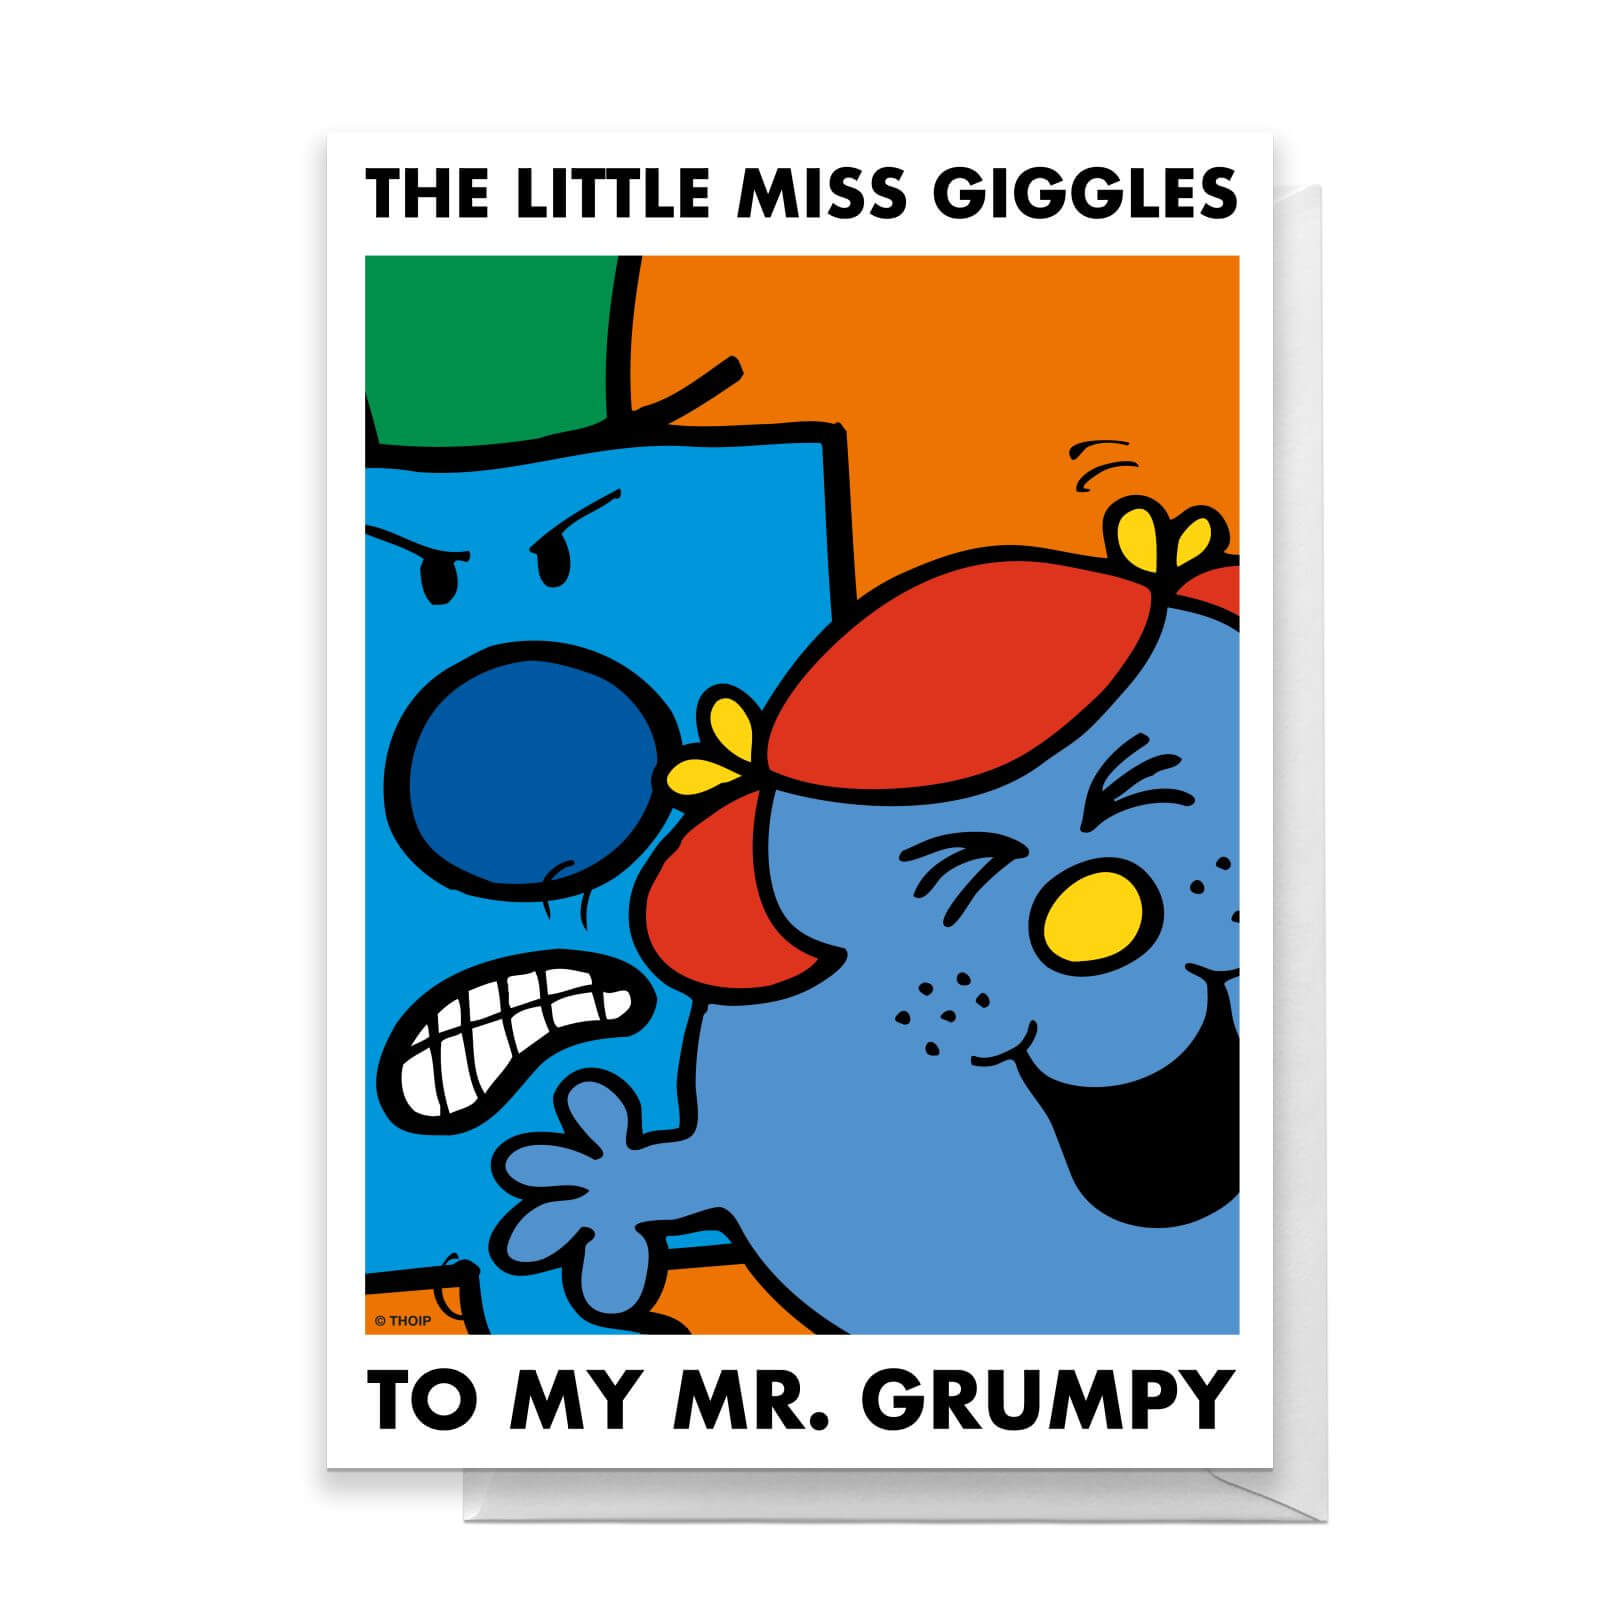 Mr Men & Little Miss The Little Miss Giggles To My Mr. Grumpy Greetings Card - Standard Card